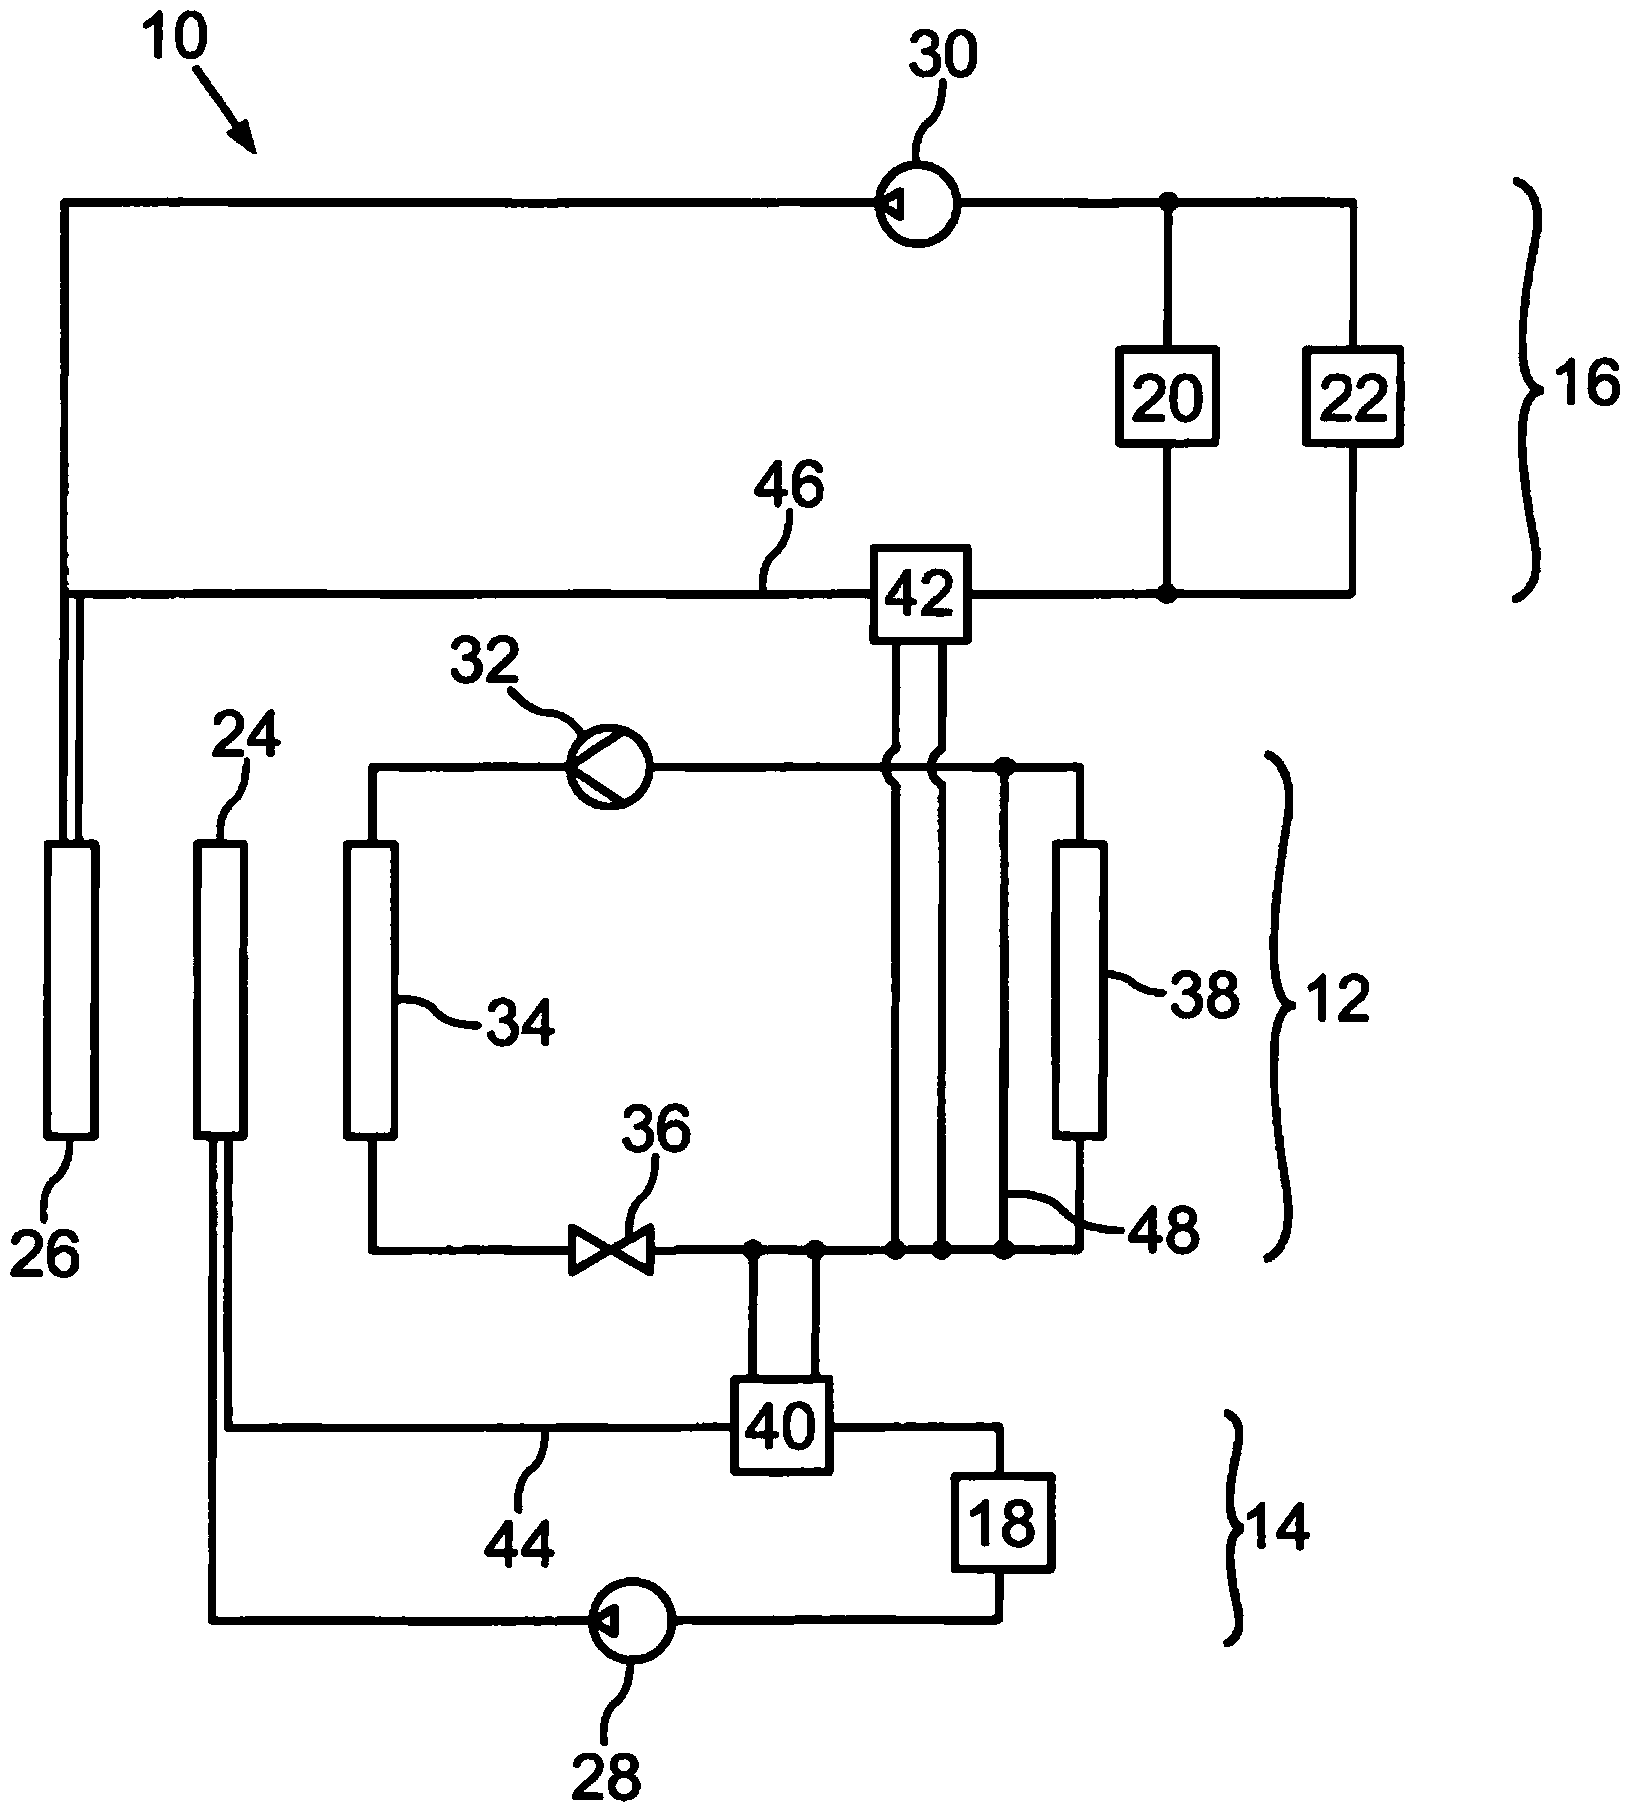 Method for operating a motor vehicle in a sports operating mode